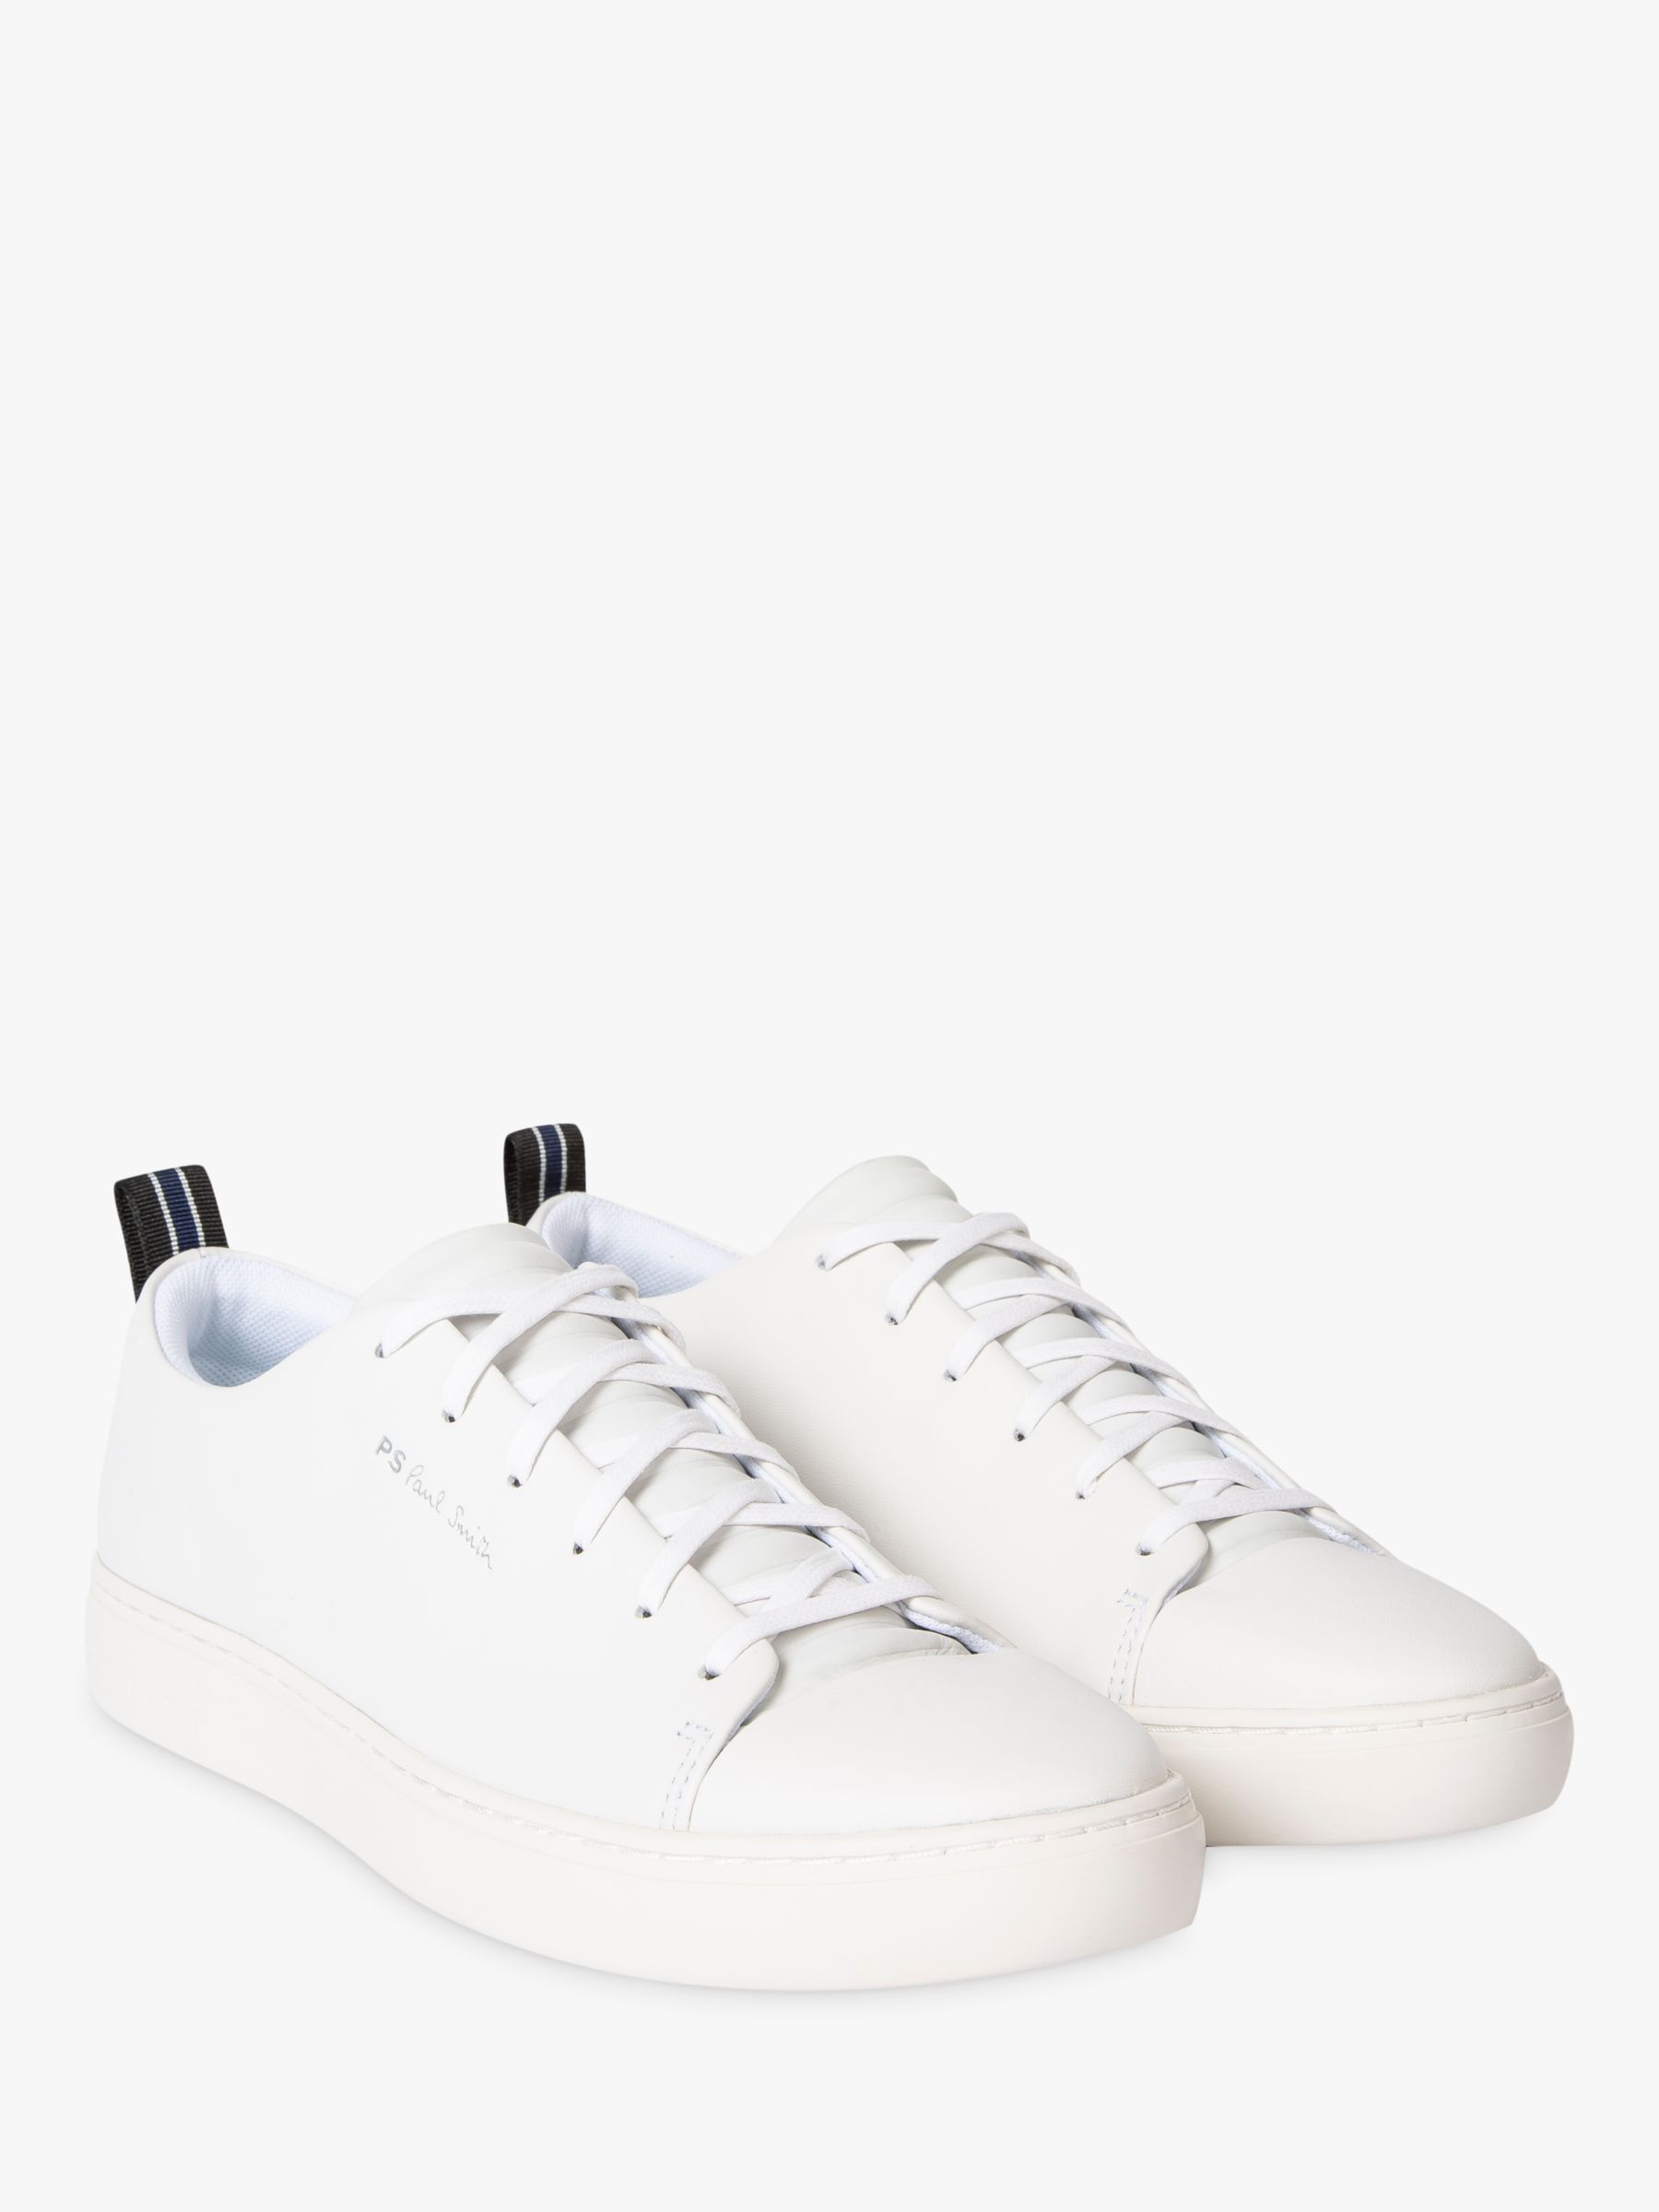 paul smith white trainers